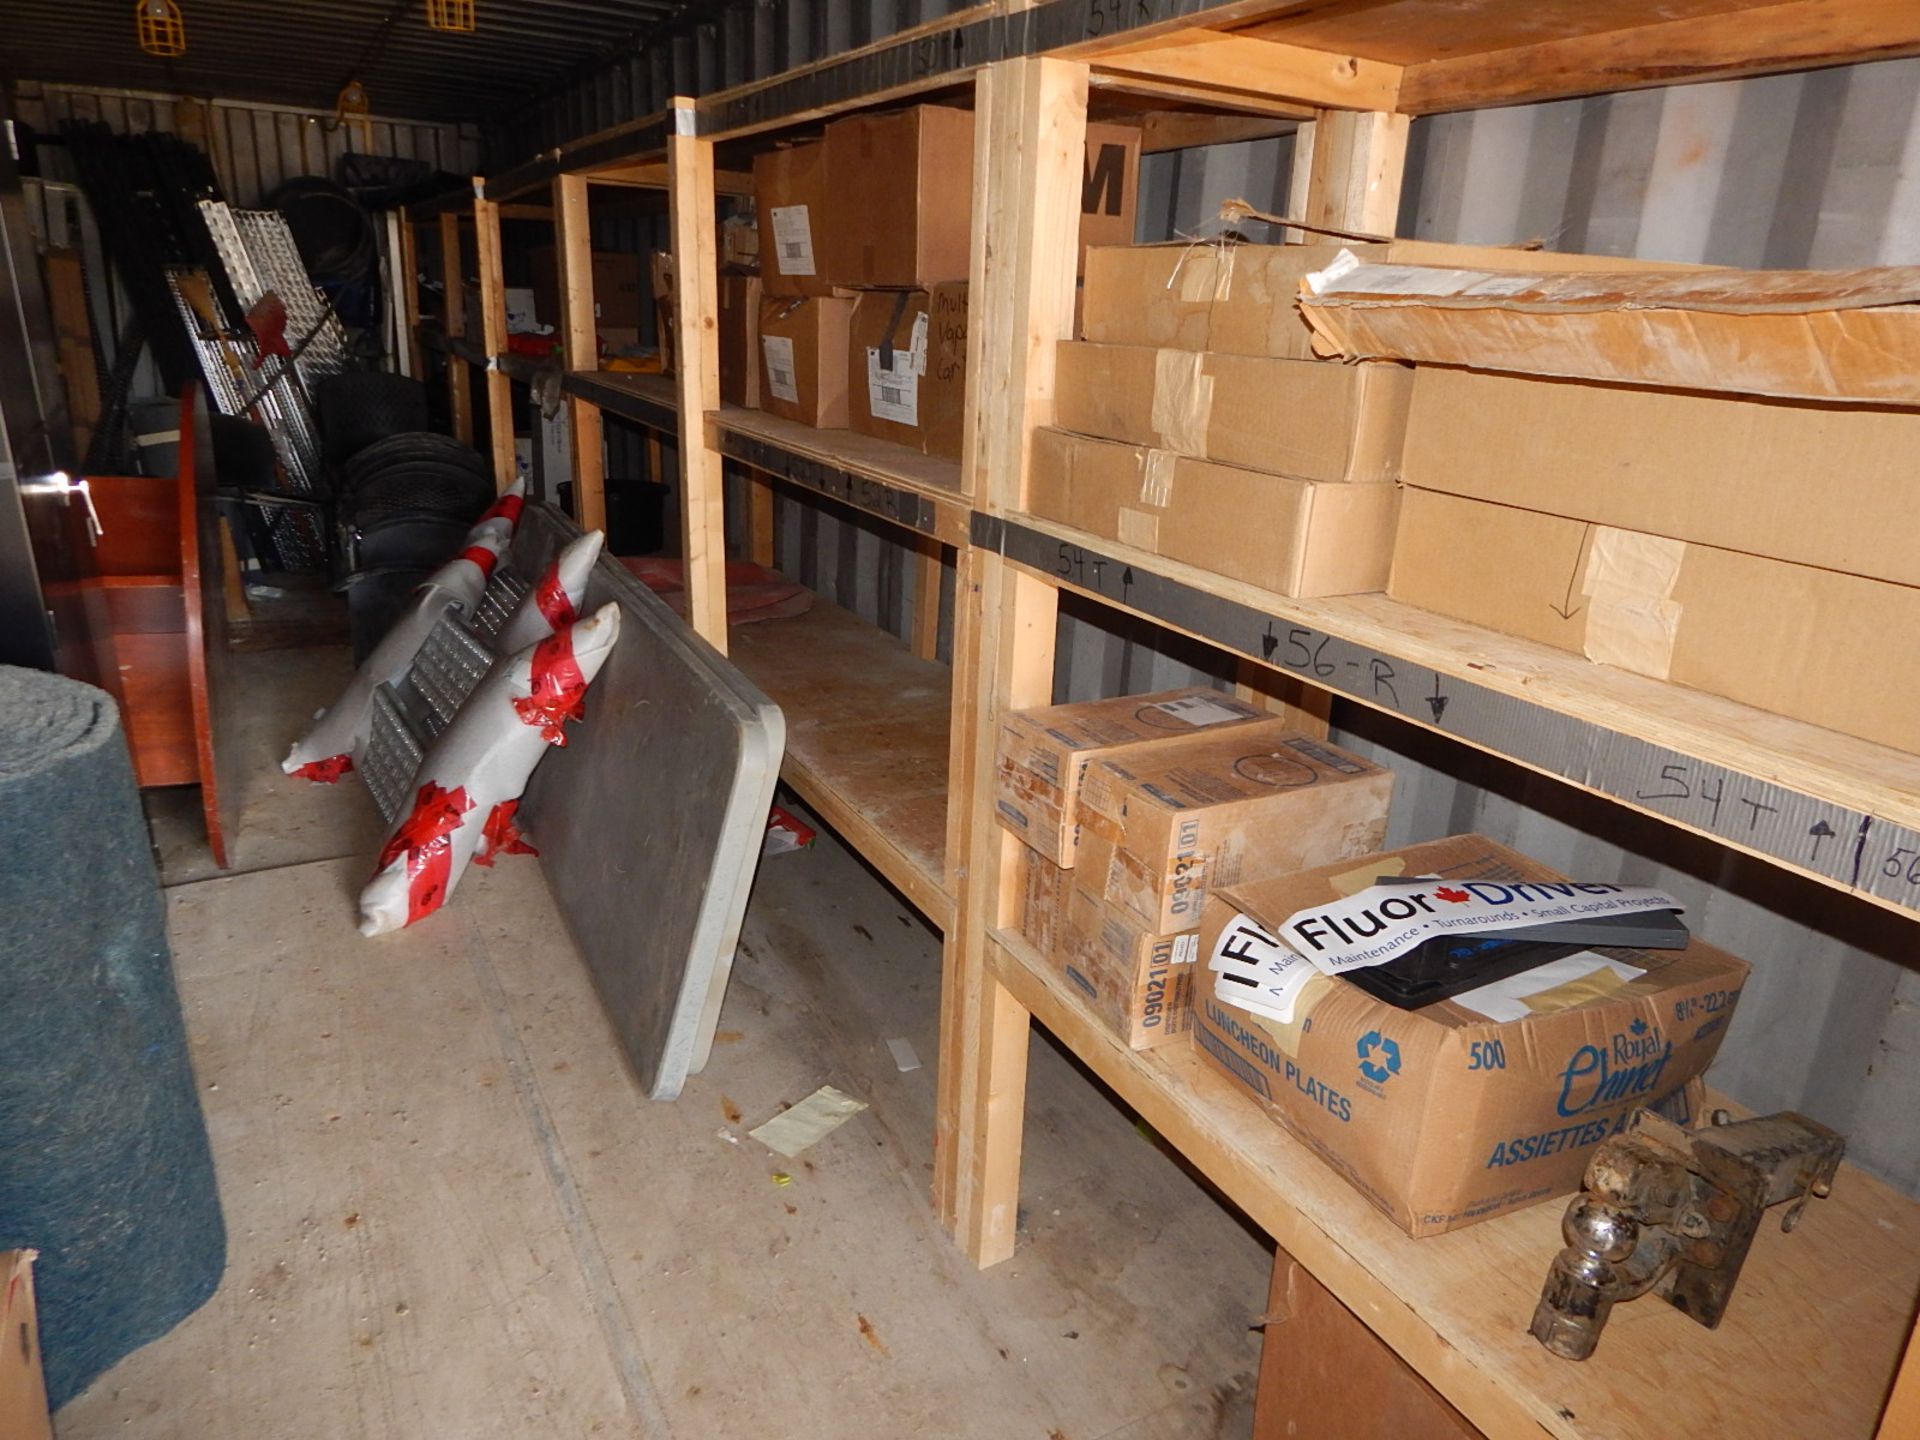 LOT/ CONTENTS OF CONTAINER CONSISTING OF FURNITURE, HARDWARE, CABINET, AND ADJUSTABLE RACKING - Image 5 of 8